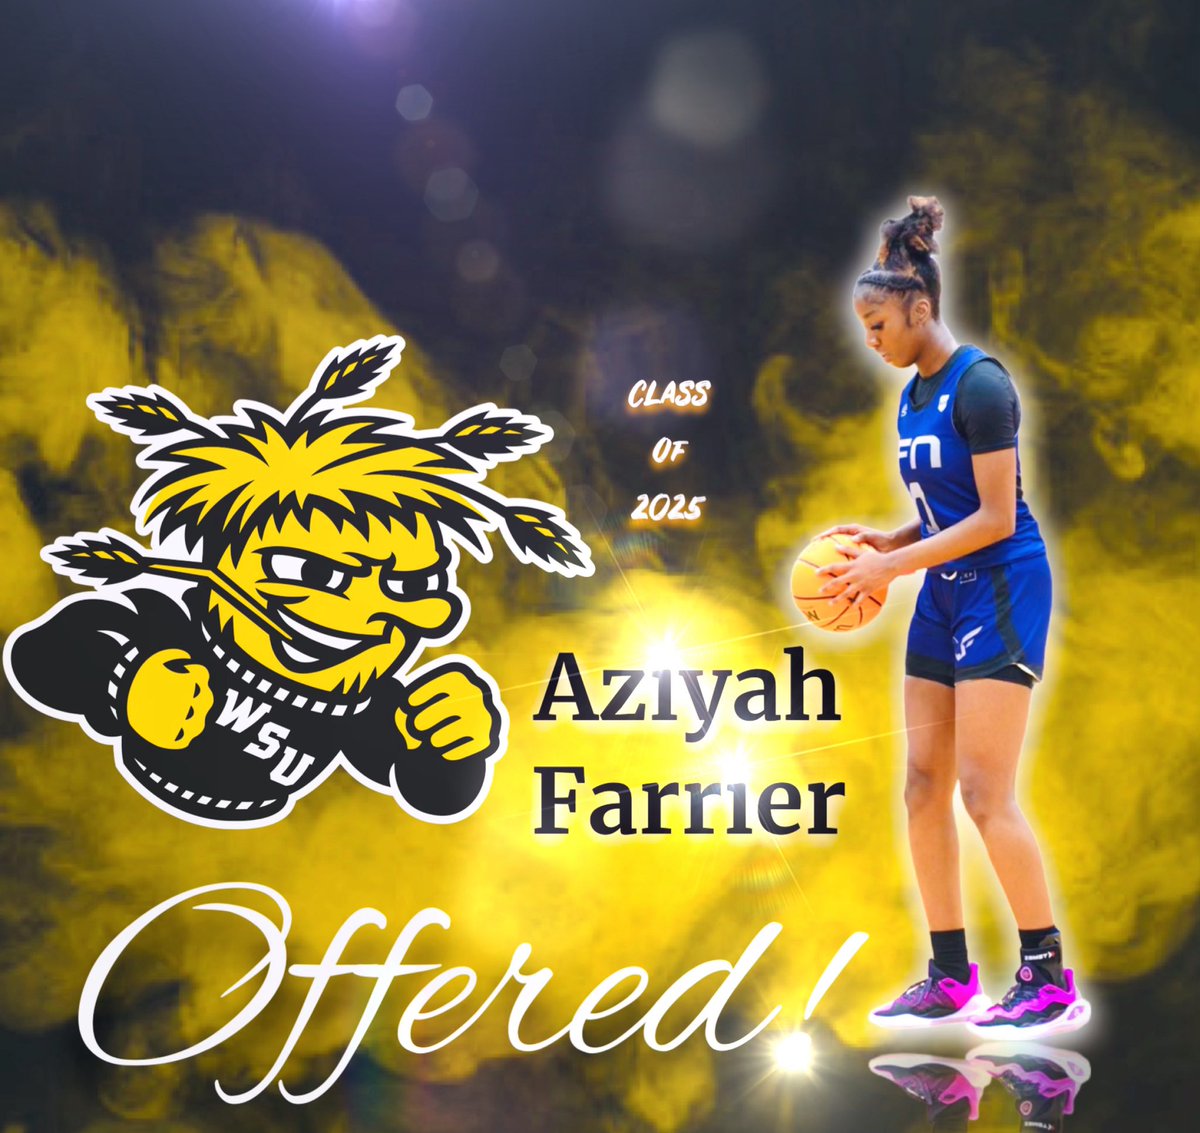 To say I’m proud is a understatement. Thank @terrynooner  @GoShockers @brookecostley for offering me the opportunity to compete at the next level…

@IFNGUAA 💜🤍
@SuddenEwbb 
@therealdrelewis 

#StayingHumble
#KeepKeepingGodFirst
#MyStoryIsStillBeingWritten